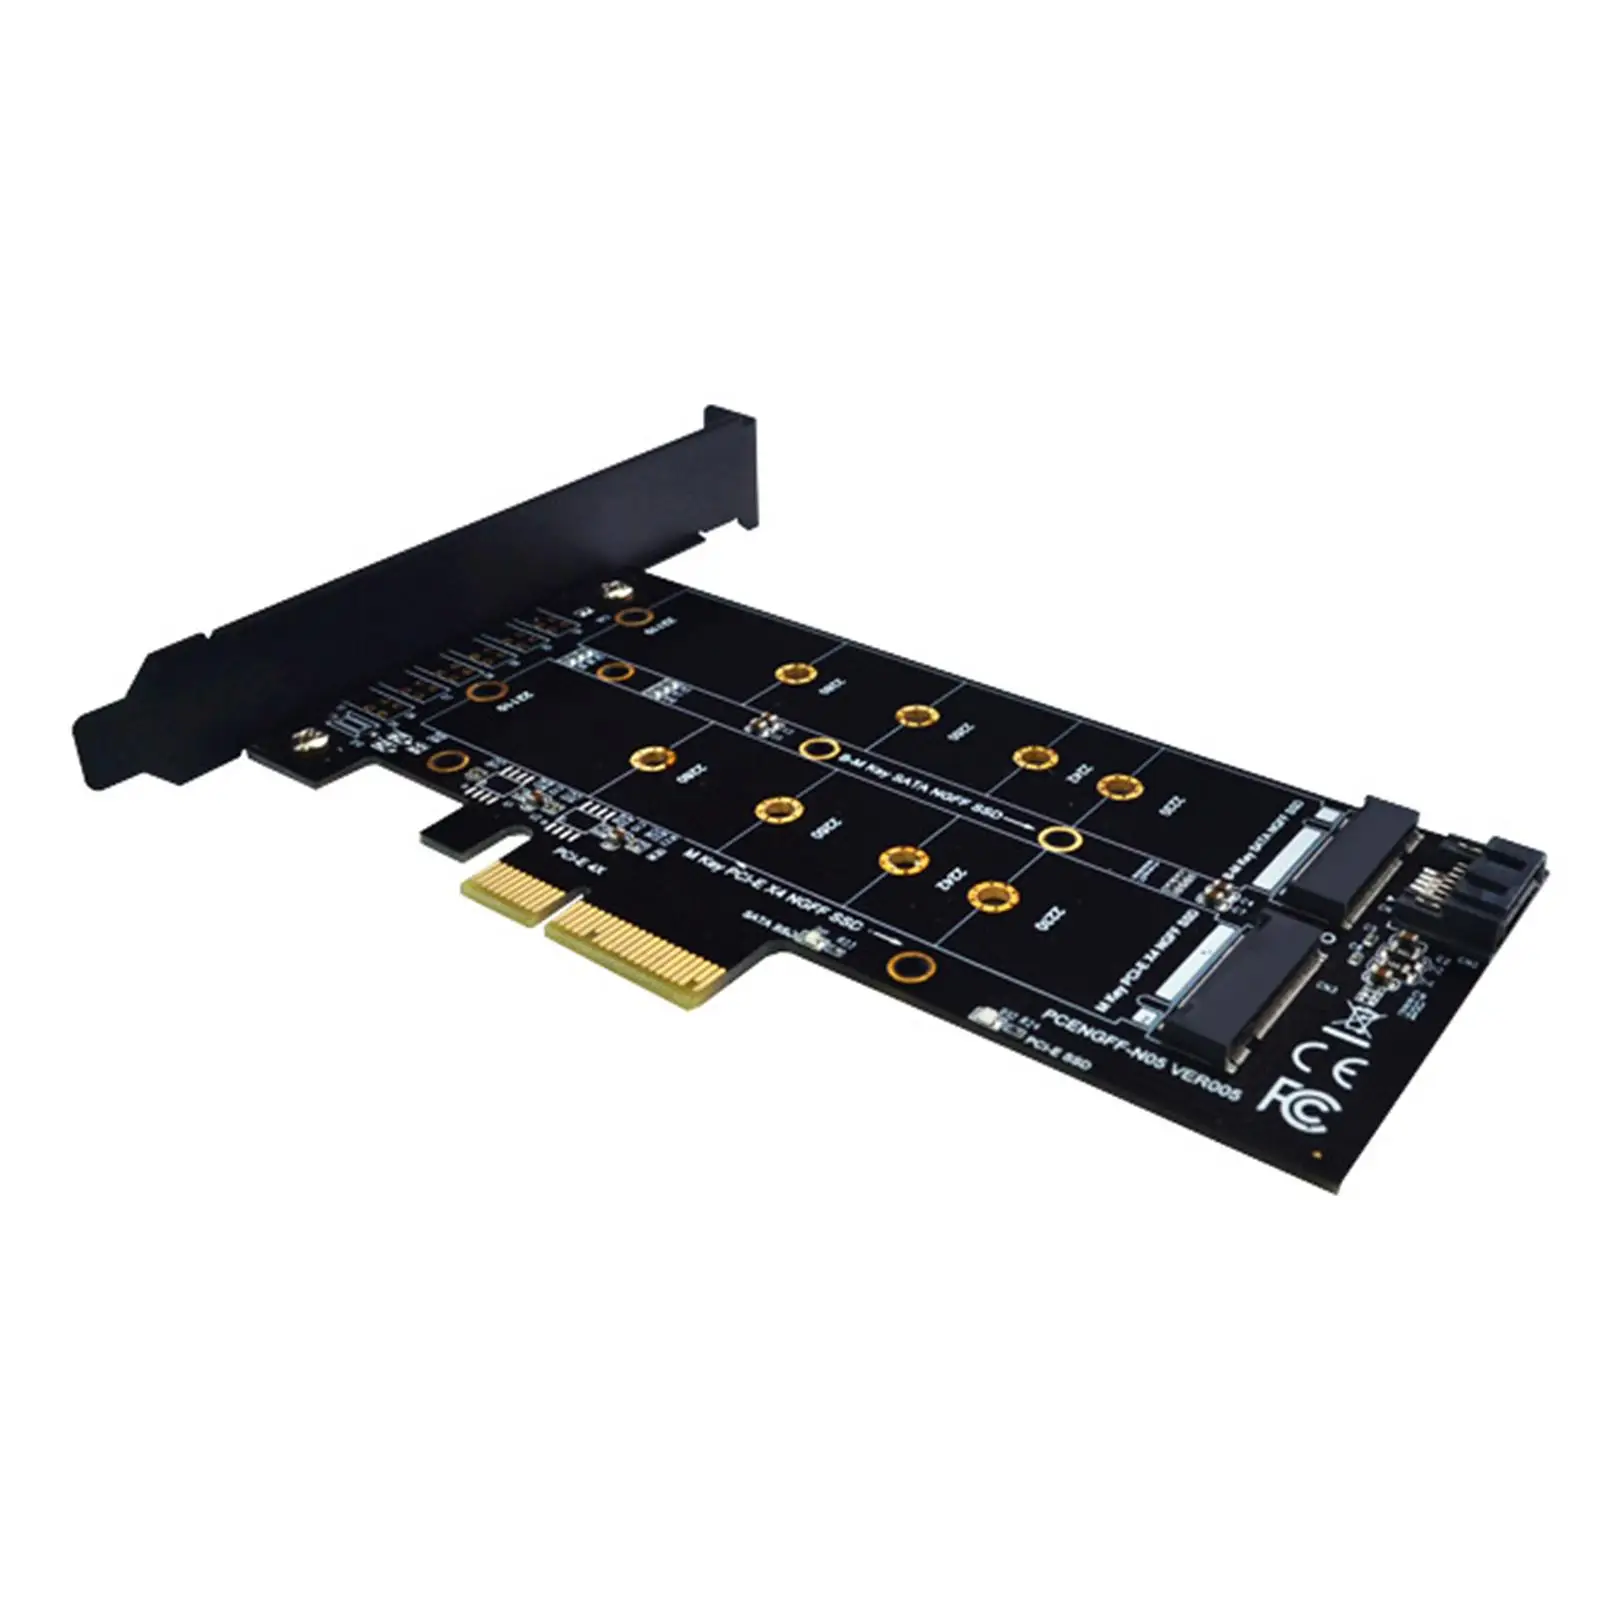 Dual M.2 PCIe Adapter Card Direct Replaces Easy Installation PCI E Riser Card B Key M Key Expansion Dual Interface M.2 to SATA